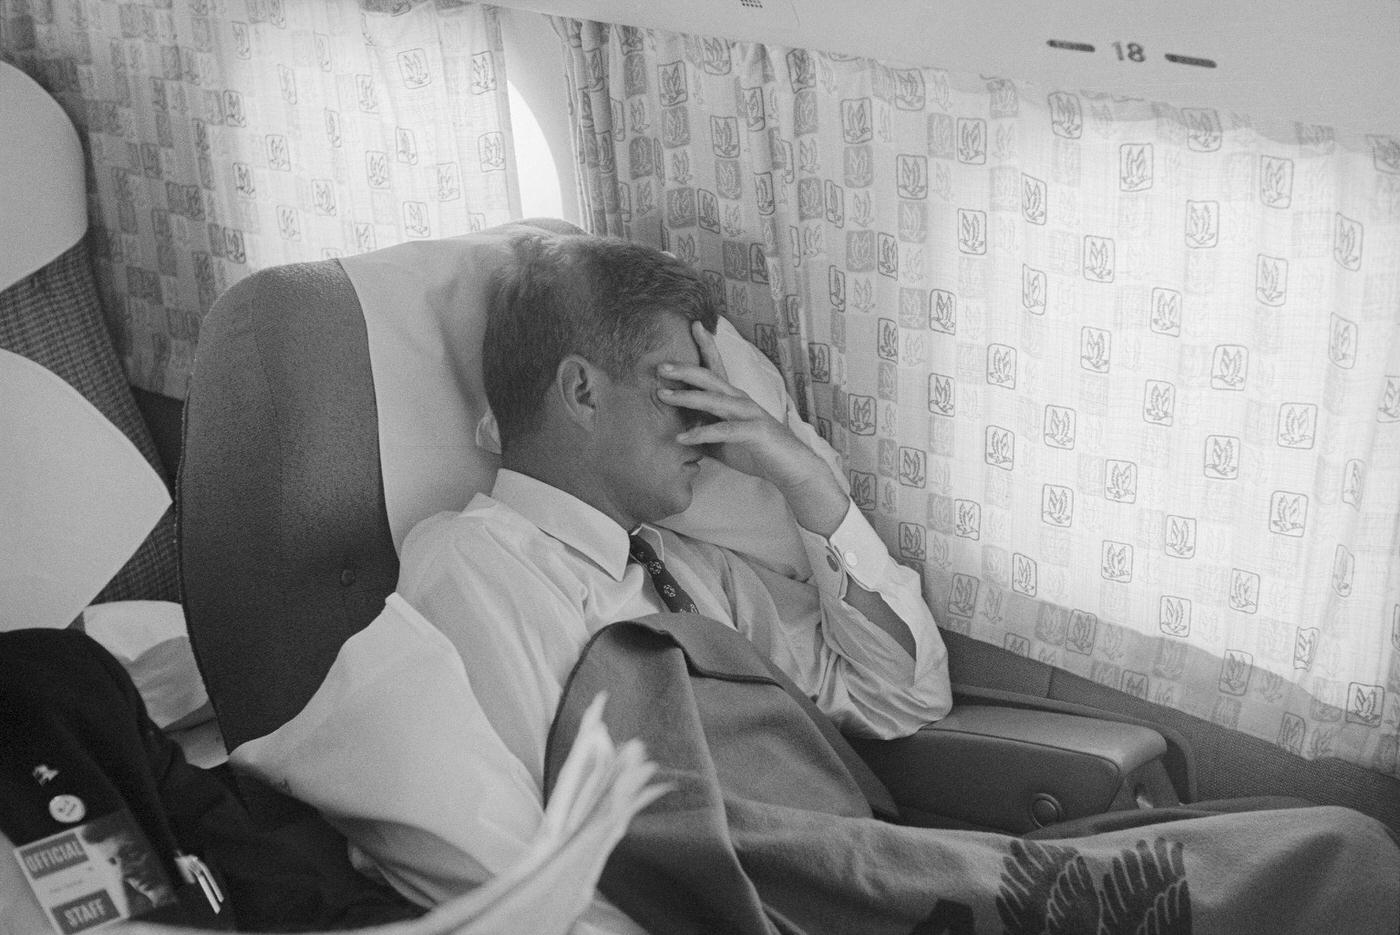 John F. Kennedy resting in the passenger cabin of an airplane during his 1960 campaign.